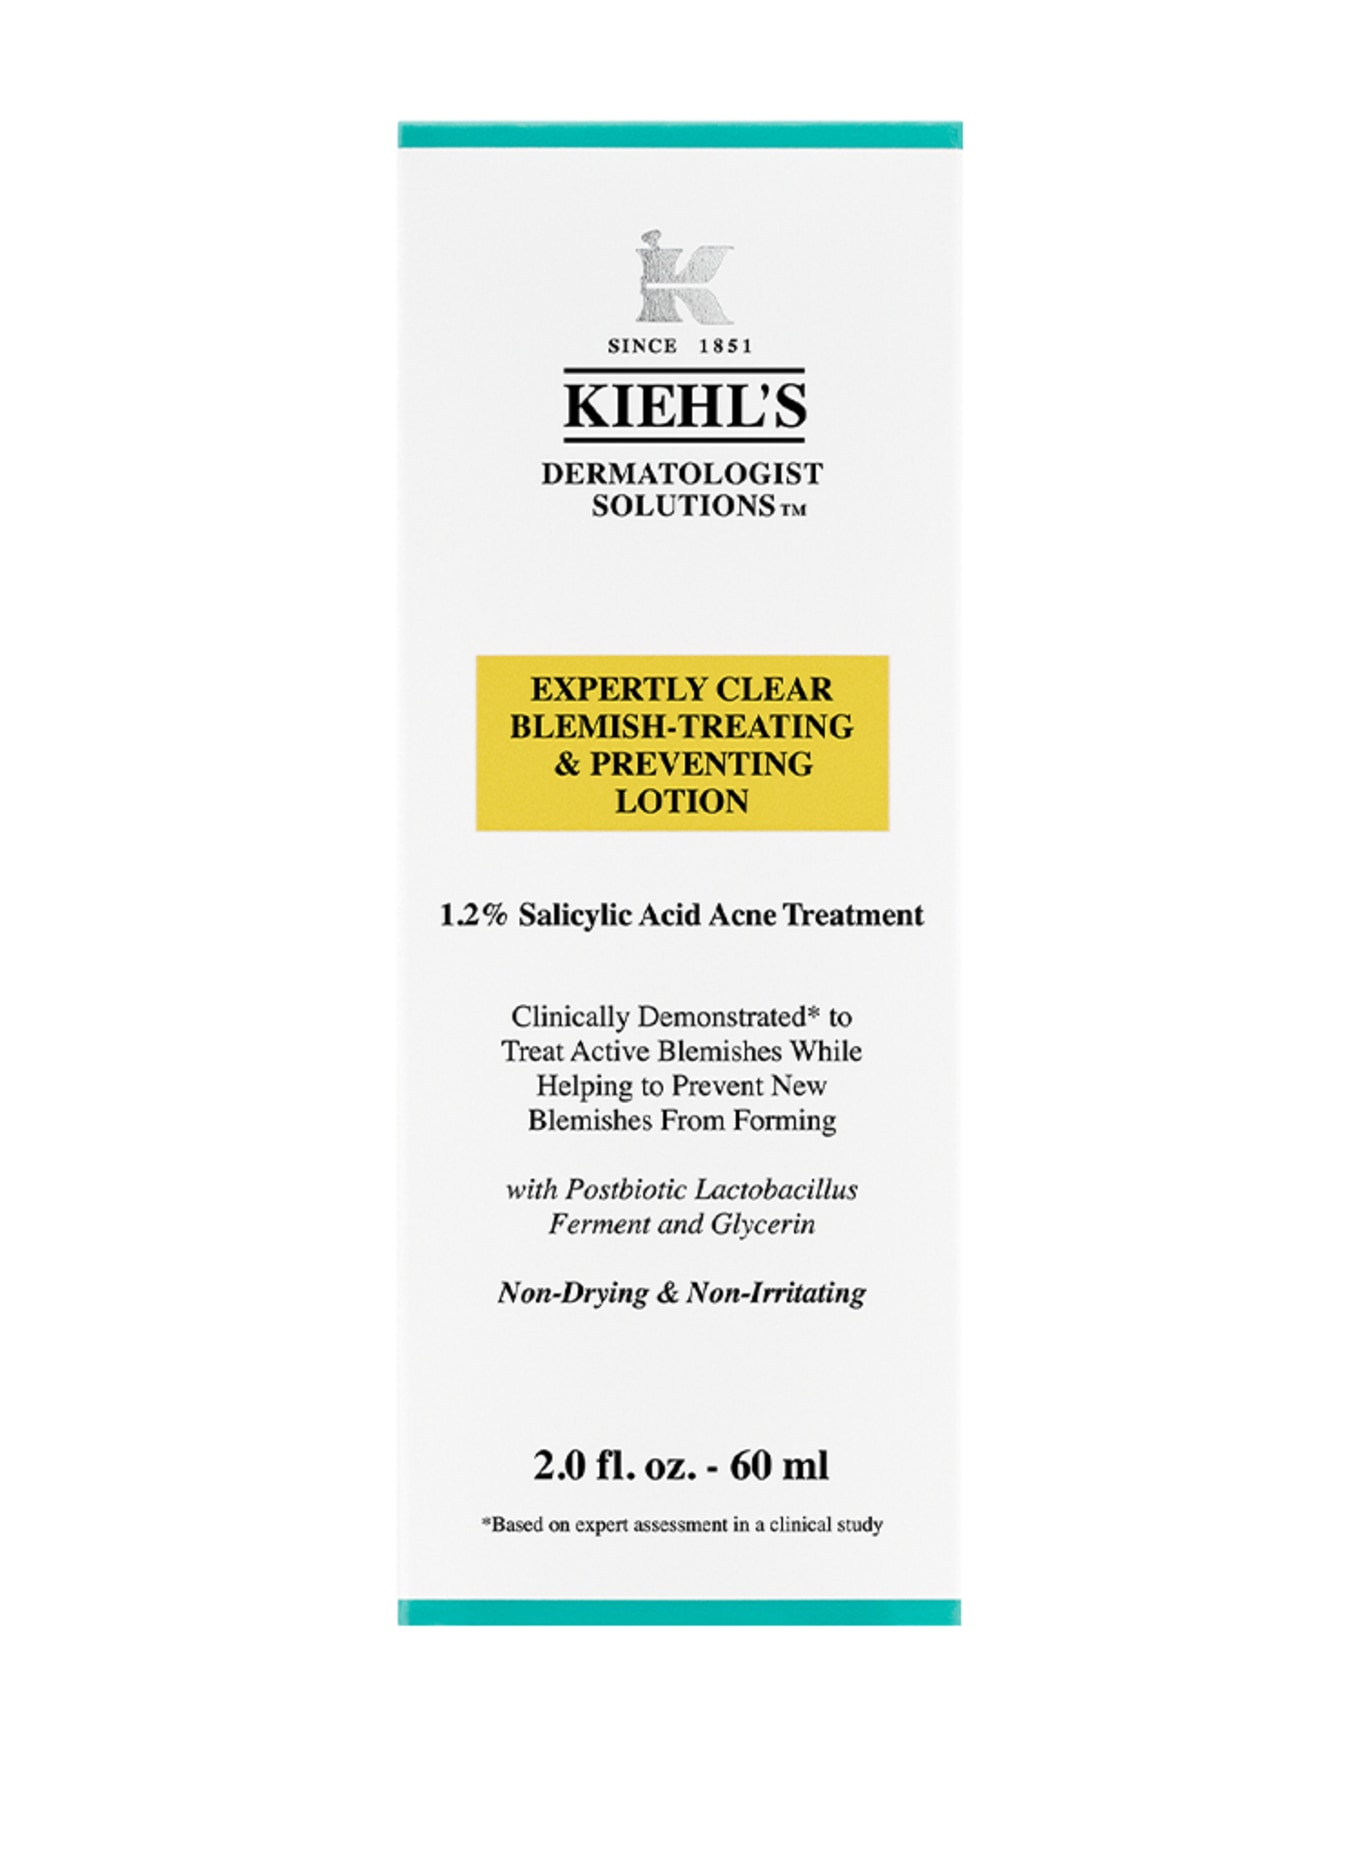 Kiehl's EXPERTLY CLEAR BLEMISH TREATING & PREVENTING LOTION (Obrázek 2)